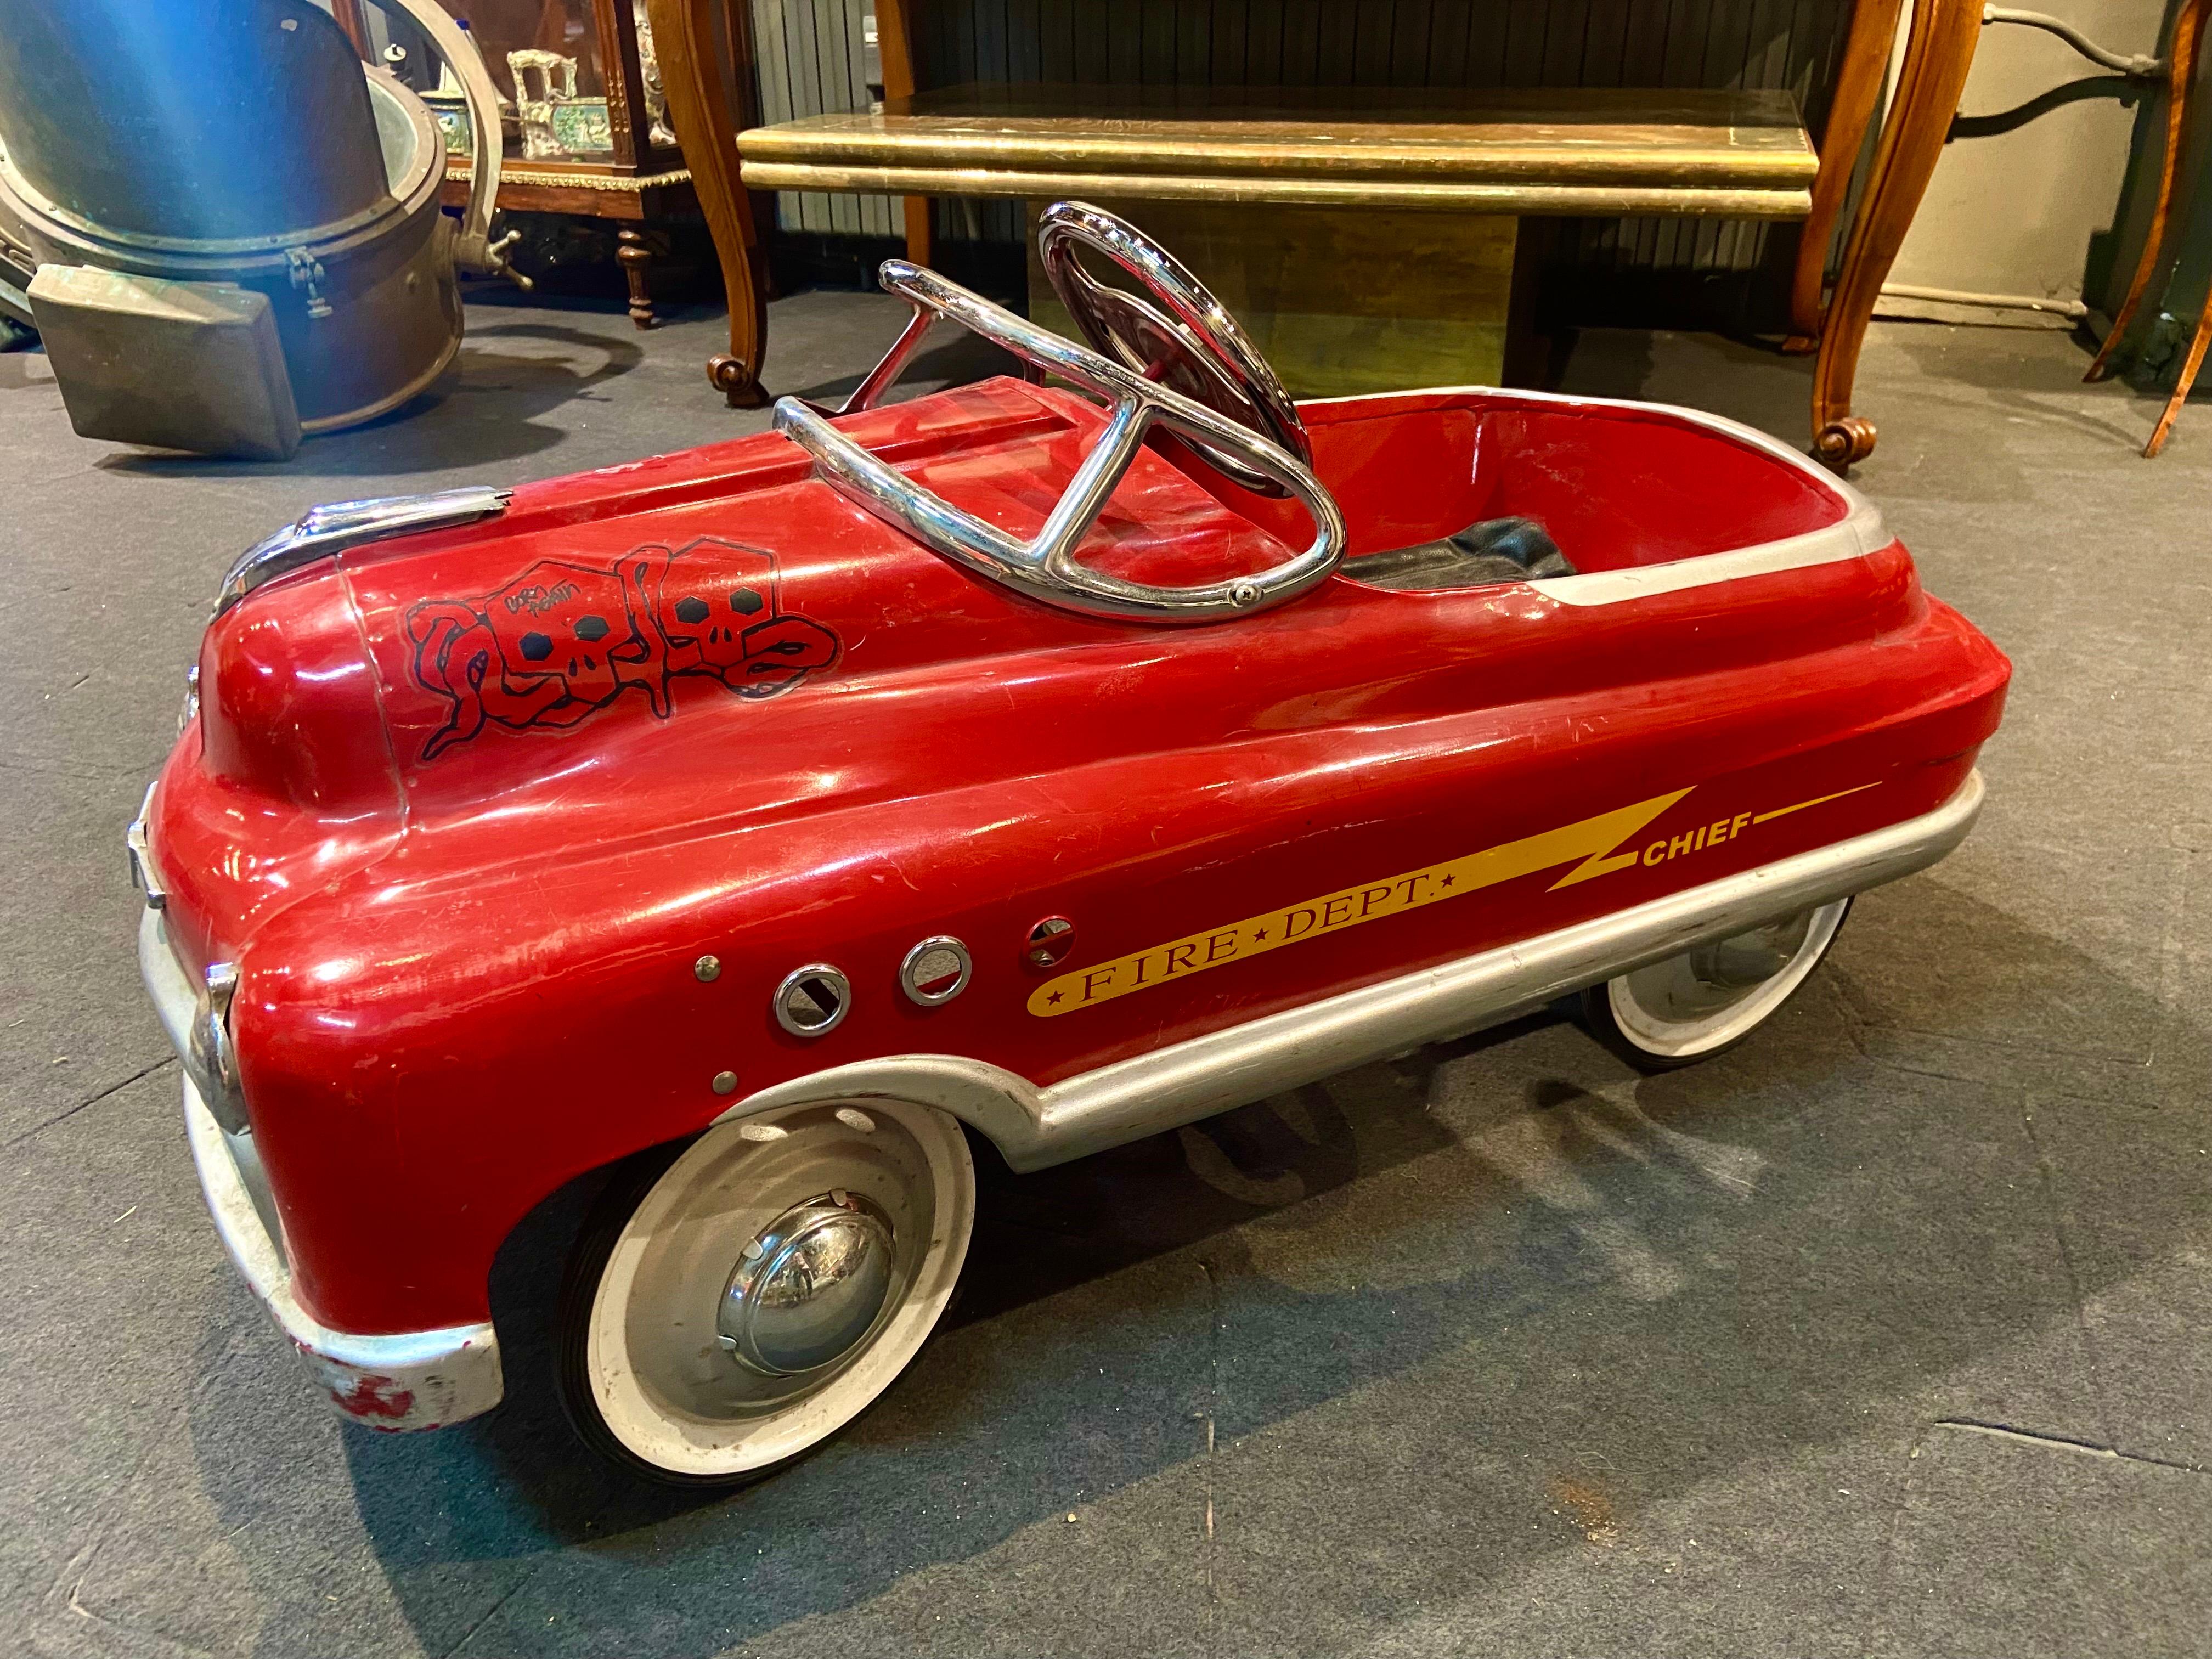 Large sized vintage pedal fire department car in red metal. Very good condition with some traces of use and age.
France, circa 1970.
 